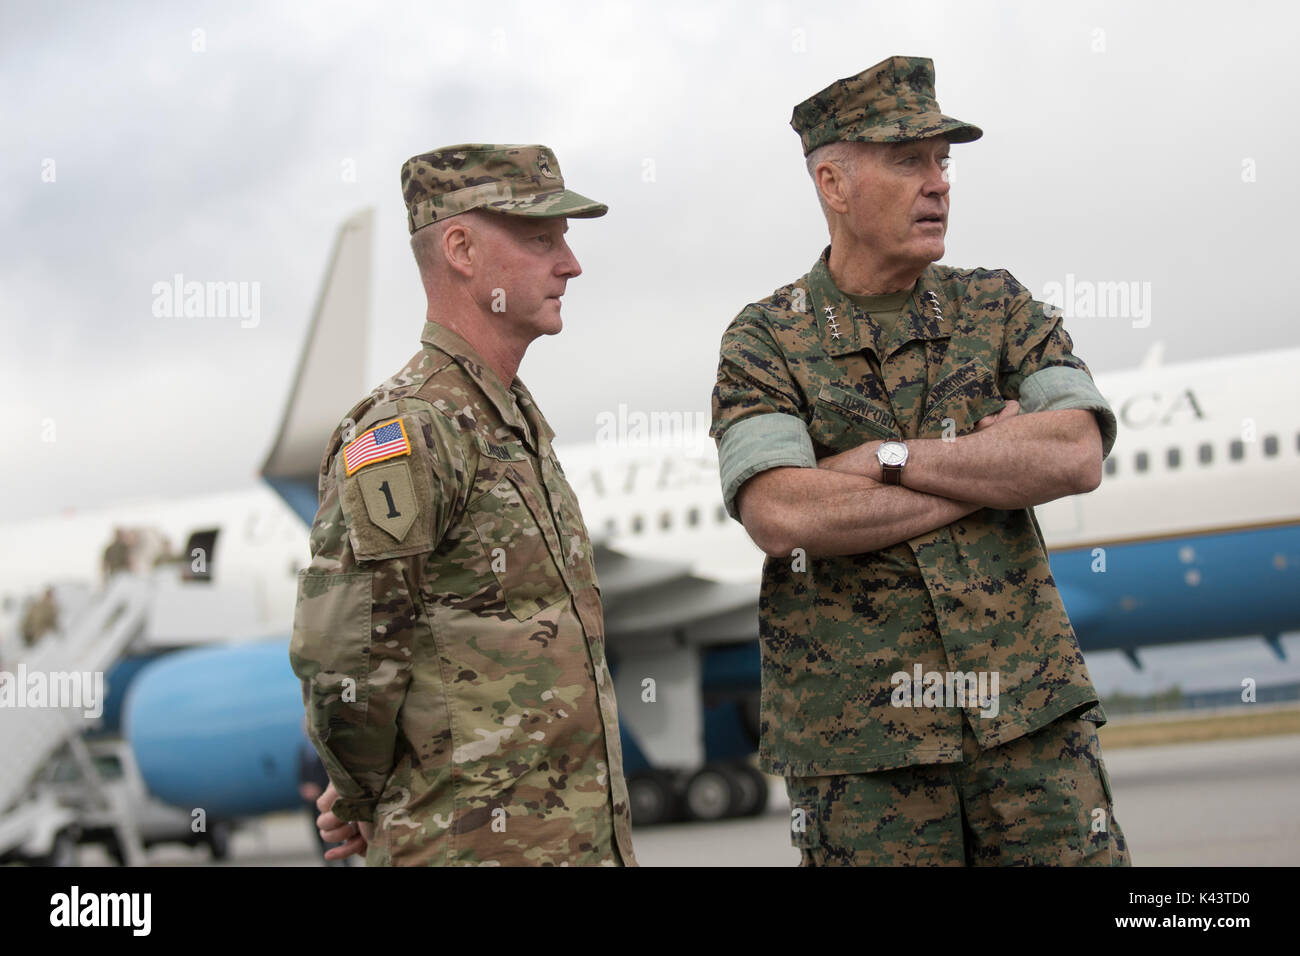 U.S. Army Space and Missile Defense Command Deputy Commanding General Tim Lawson (left) speaks with U.S. Joint Chiefs of Staff Chairman Joseph Dunford at Fort Greely August 19, 2017 near Fairbanks, Alaska.  (photo by PO1 Dominique A. Pineiro  via Planetpix) Stock Photo